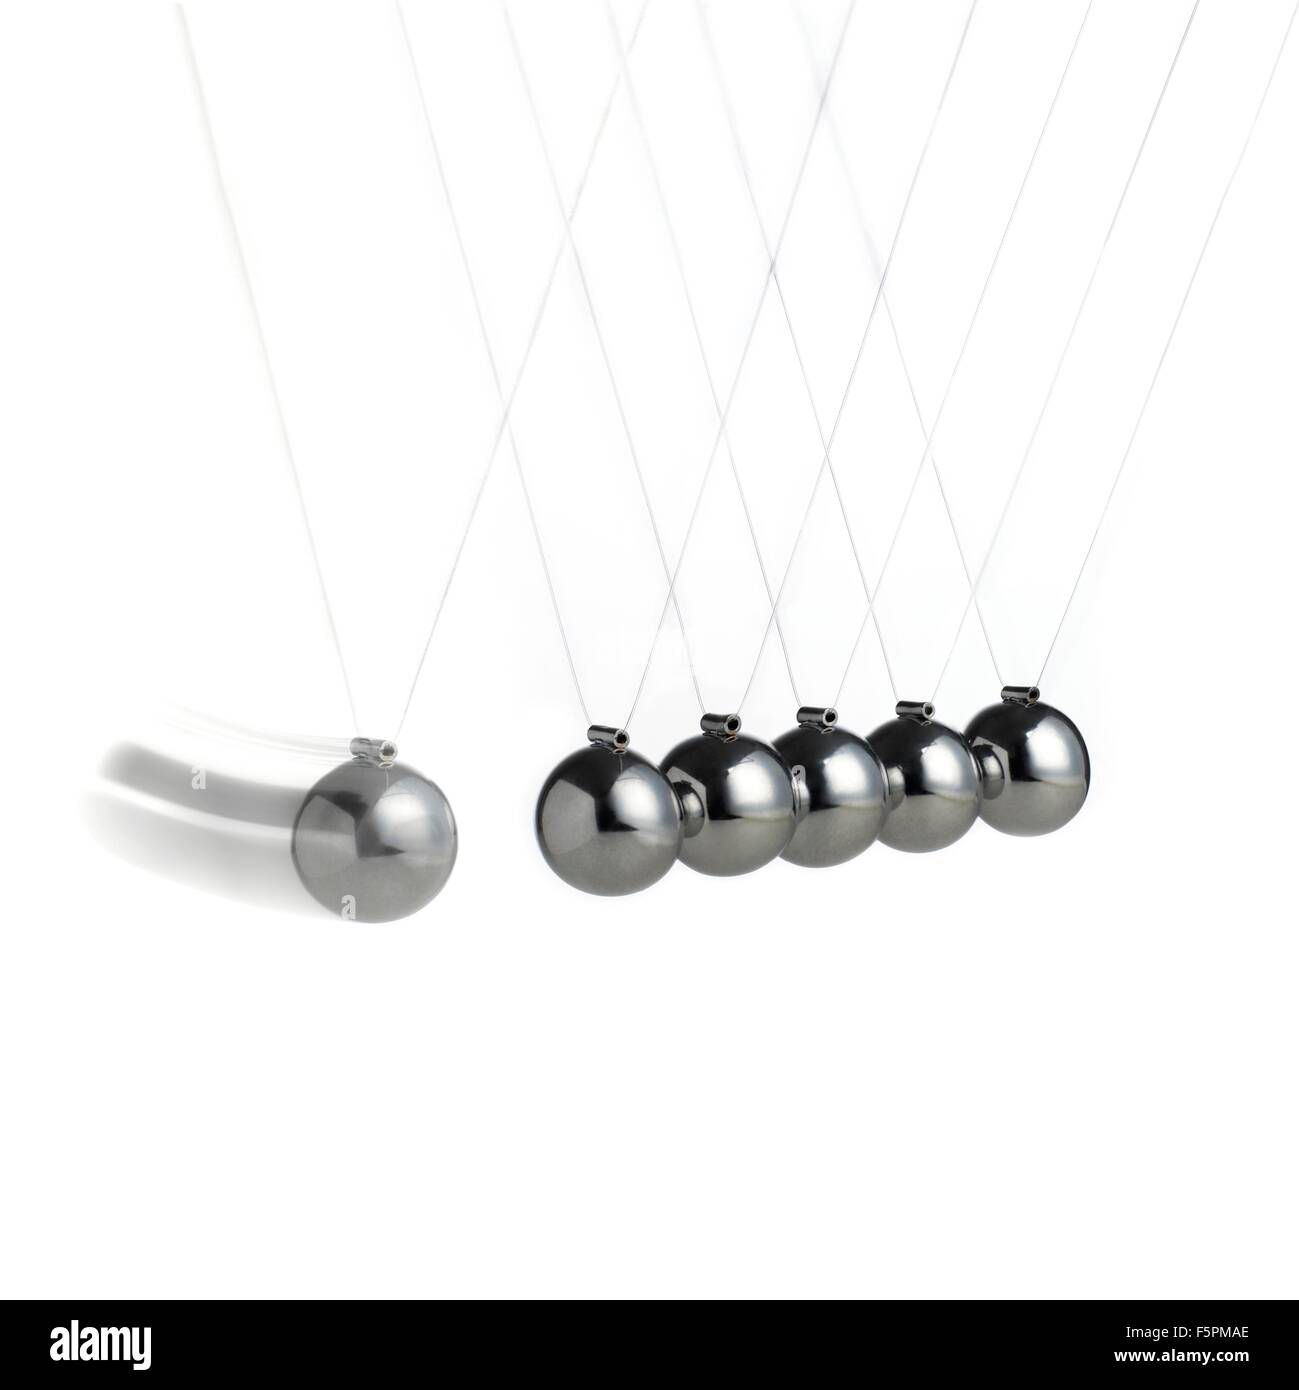 Newton's cradle against a white background. Stock Photo